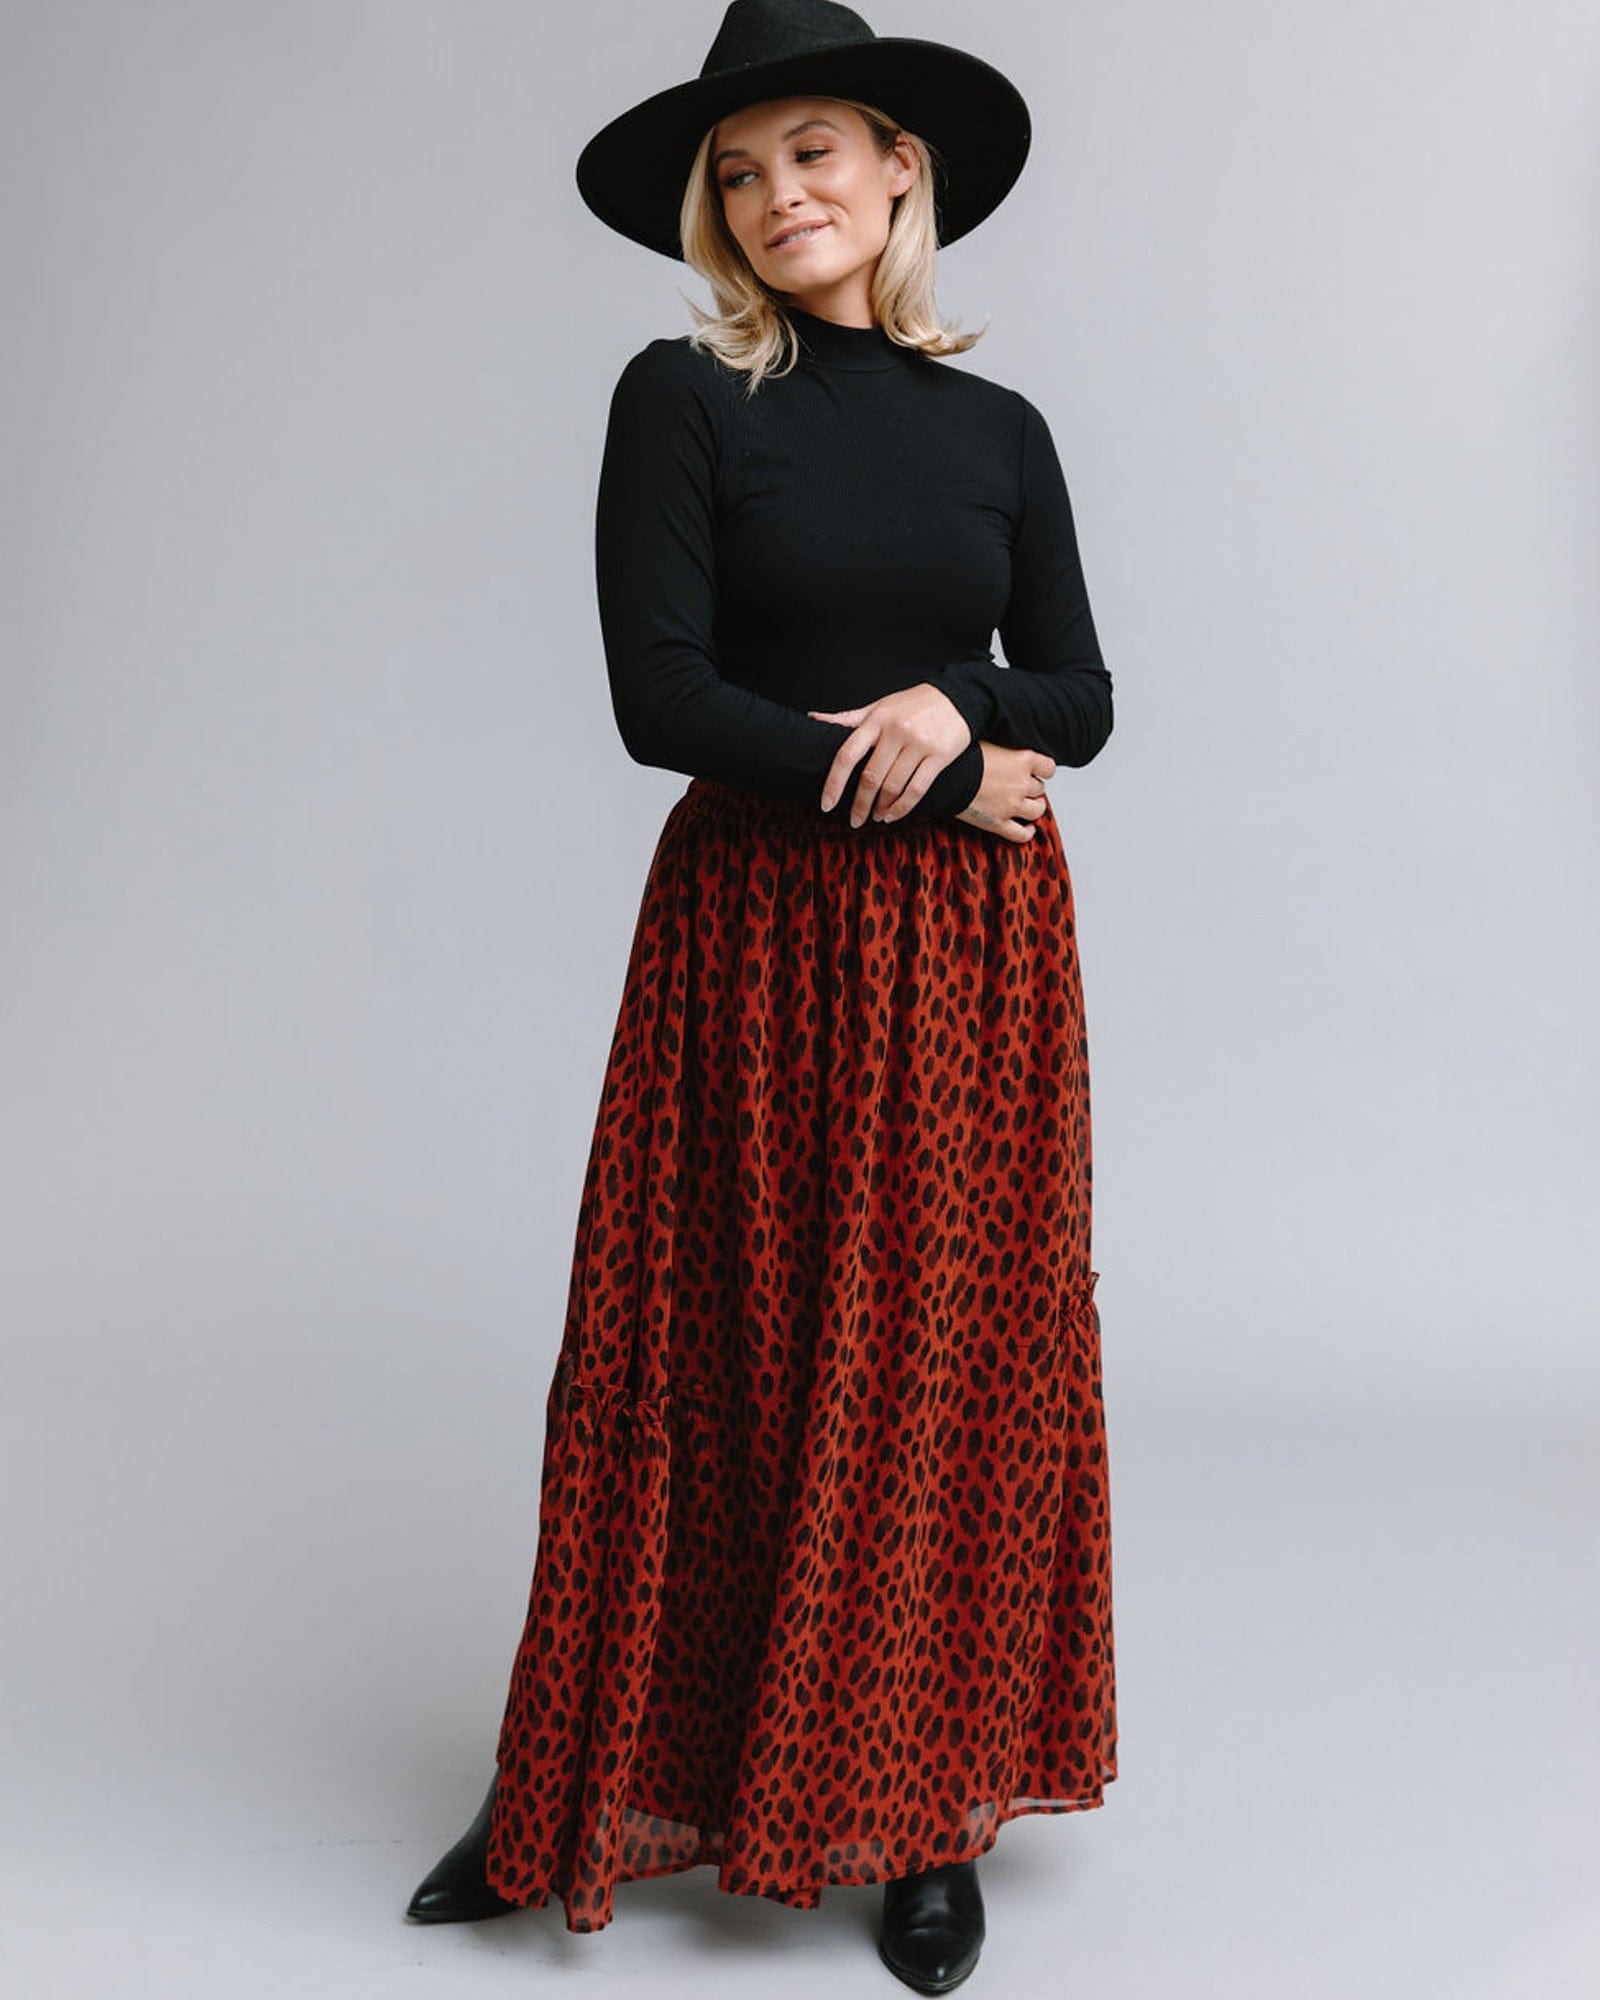 Woman in a maxi-length skirt with an animal print design